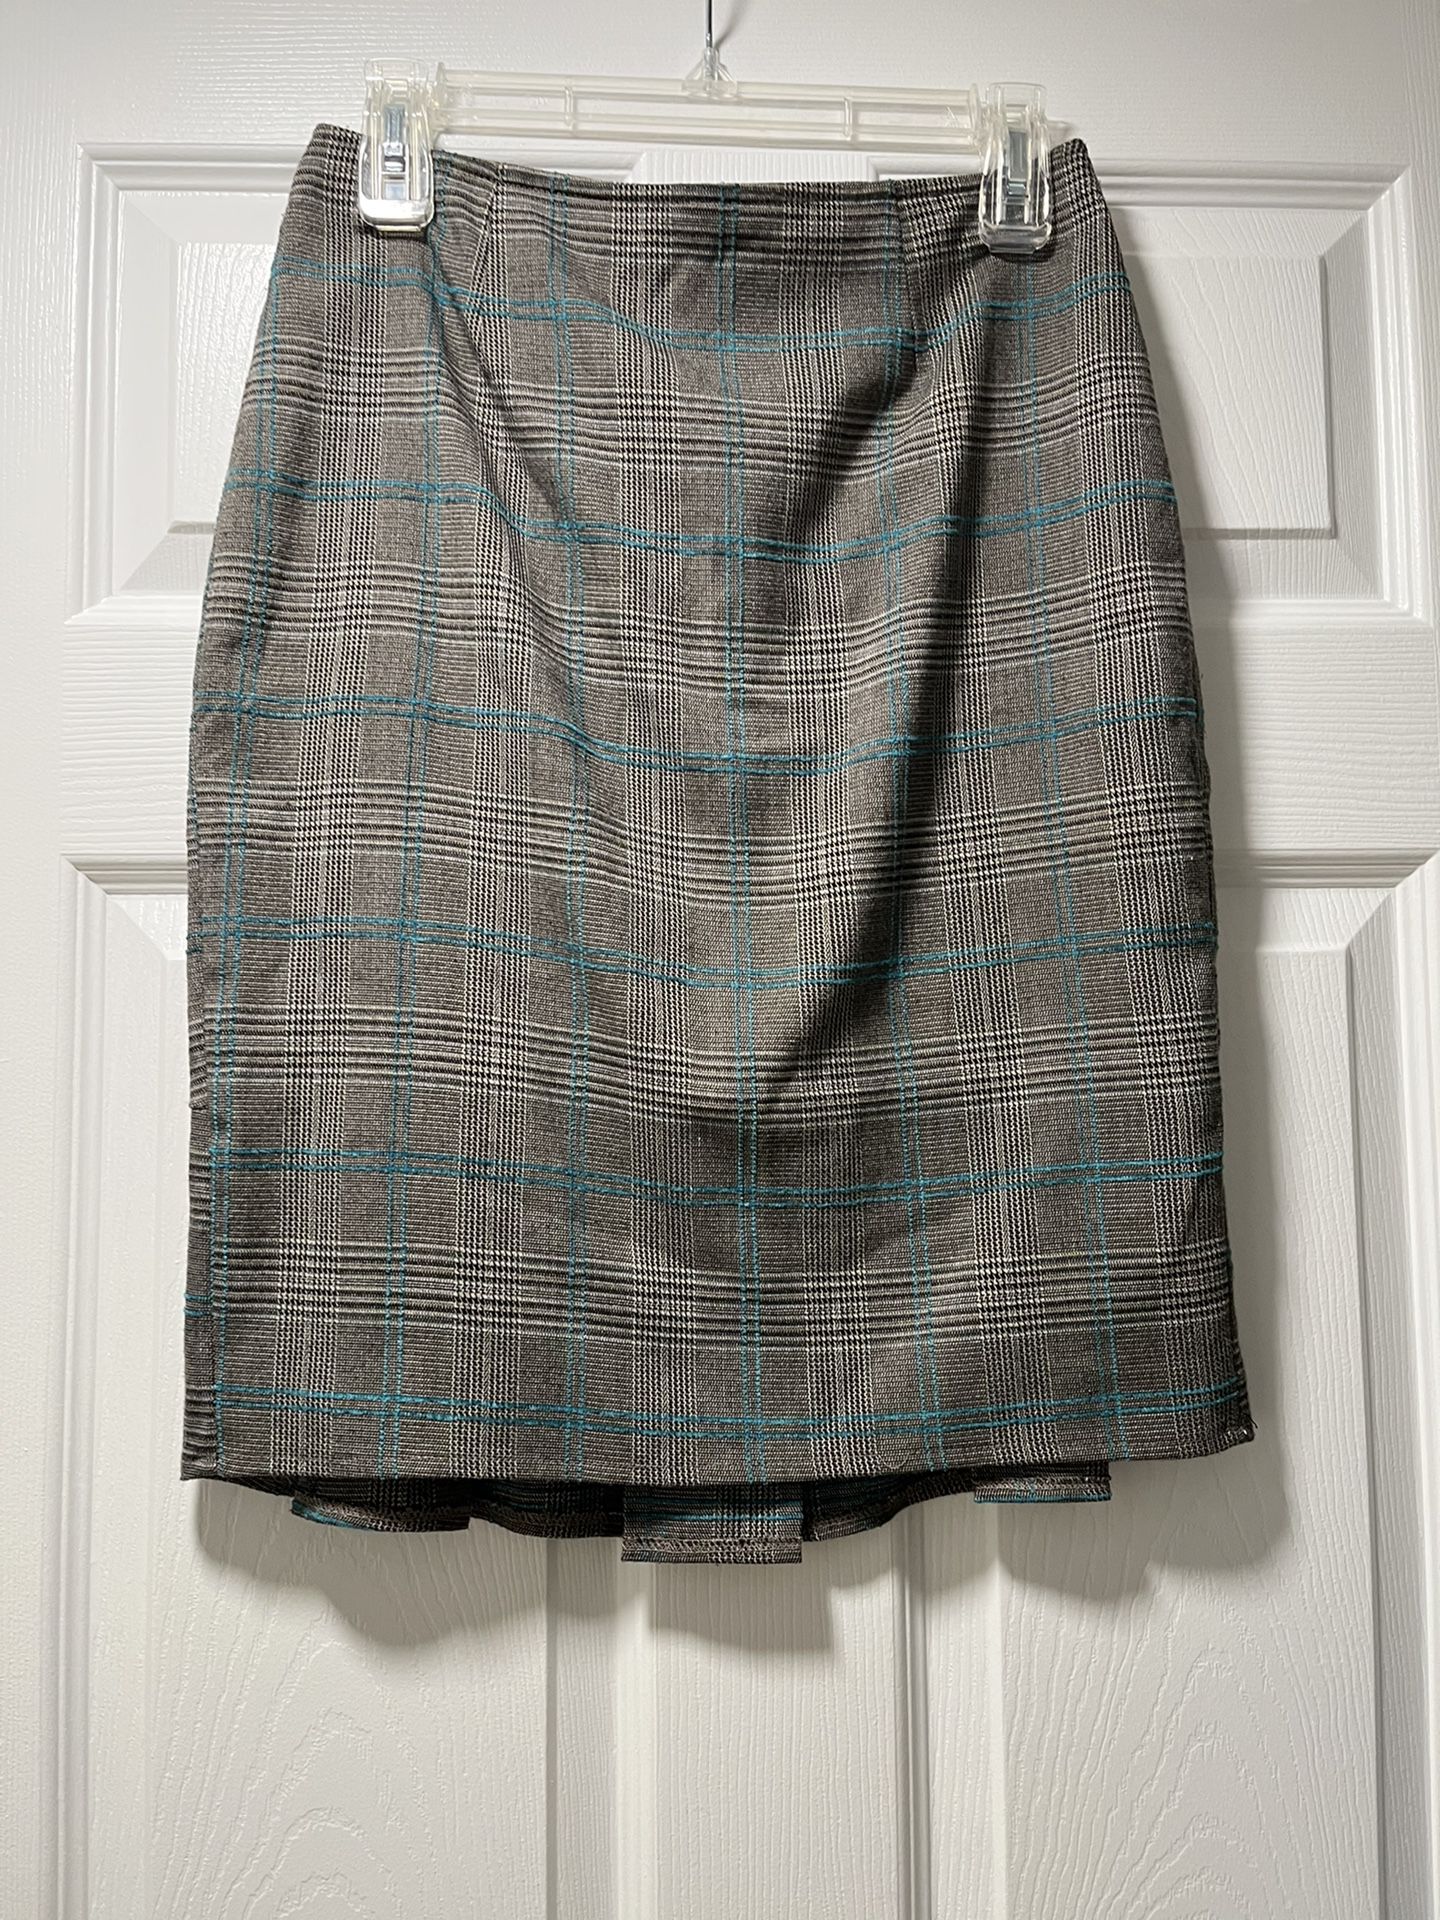 Gray checkered pencil skirt, size 6 